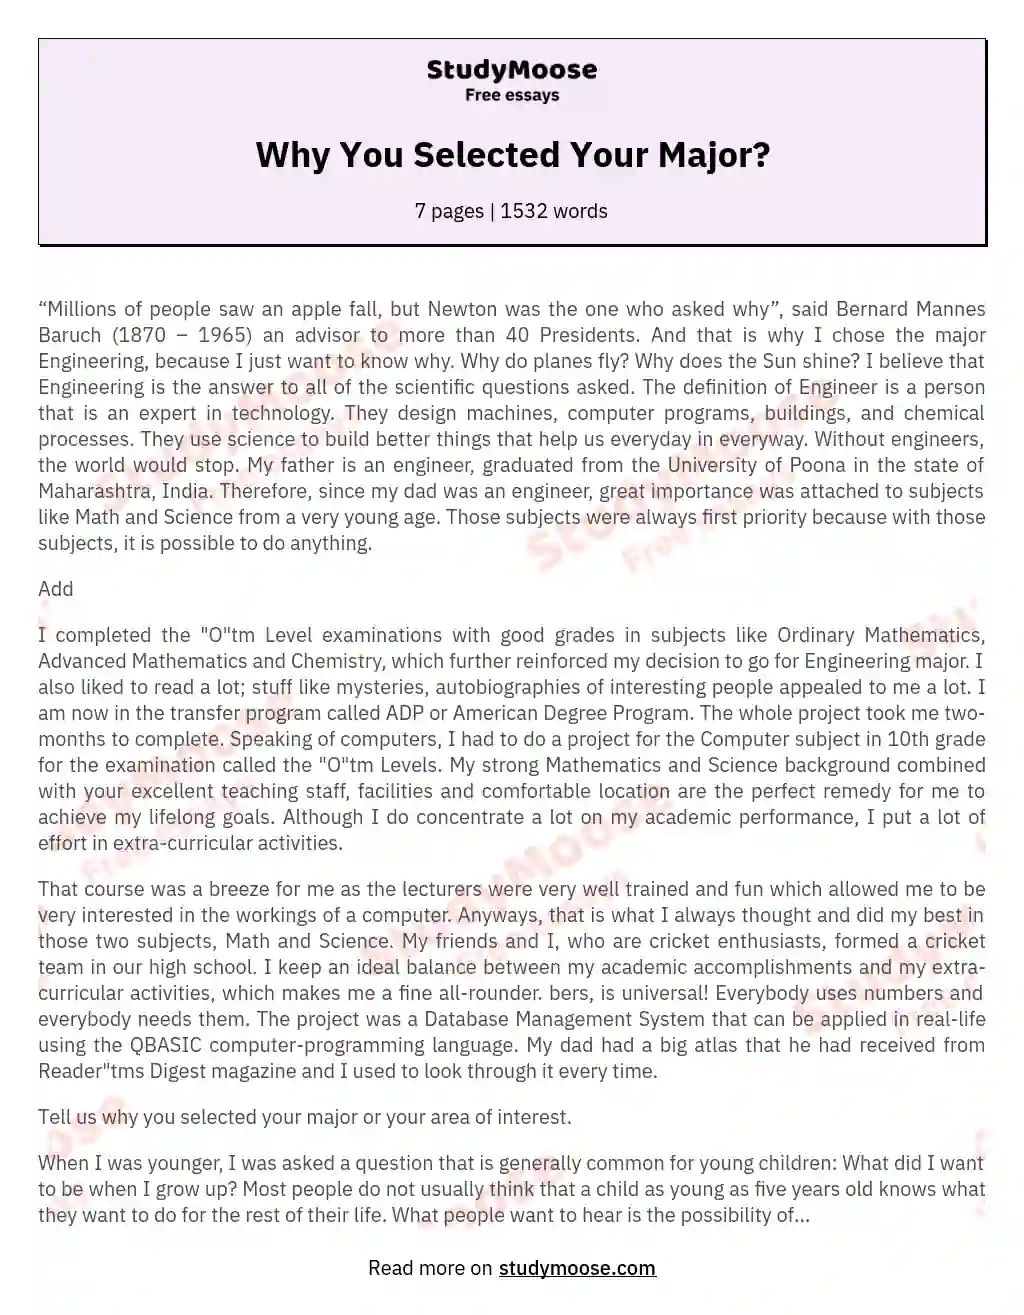 Why You Selected Your Major? essay